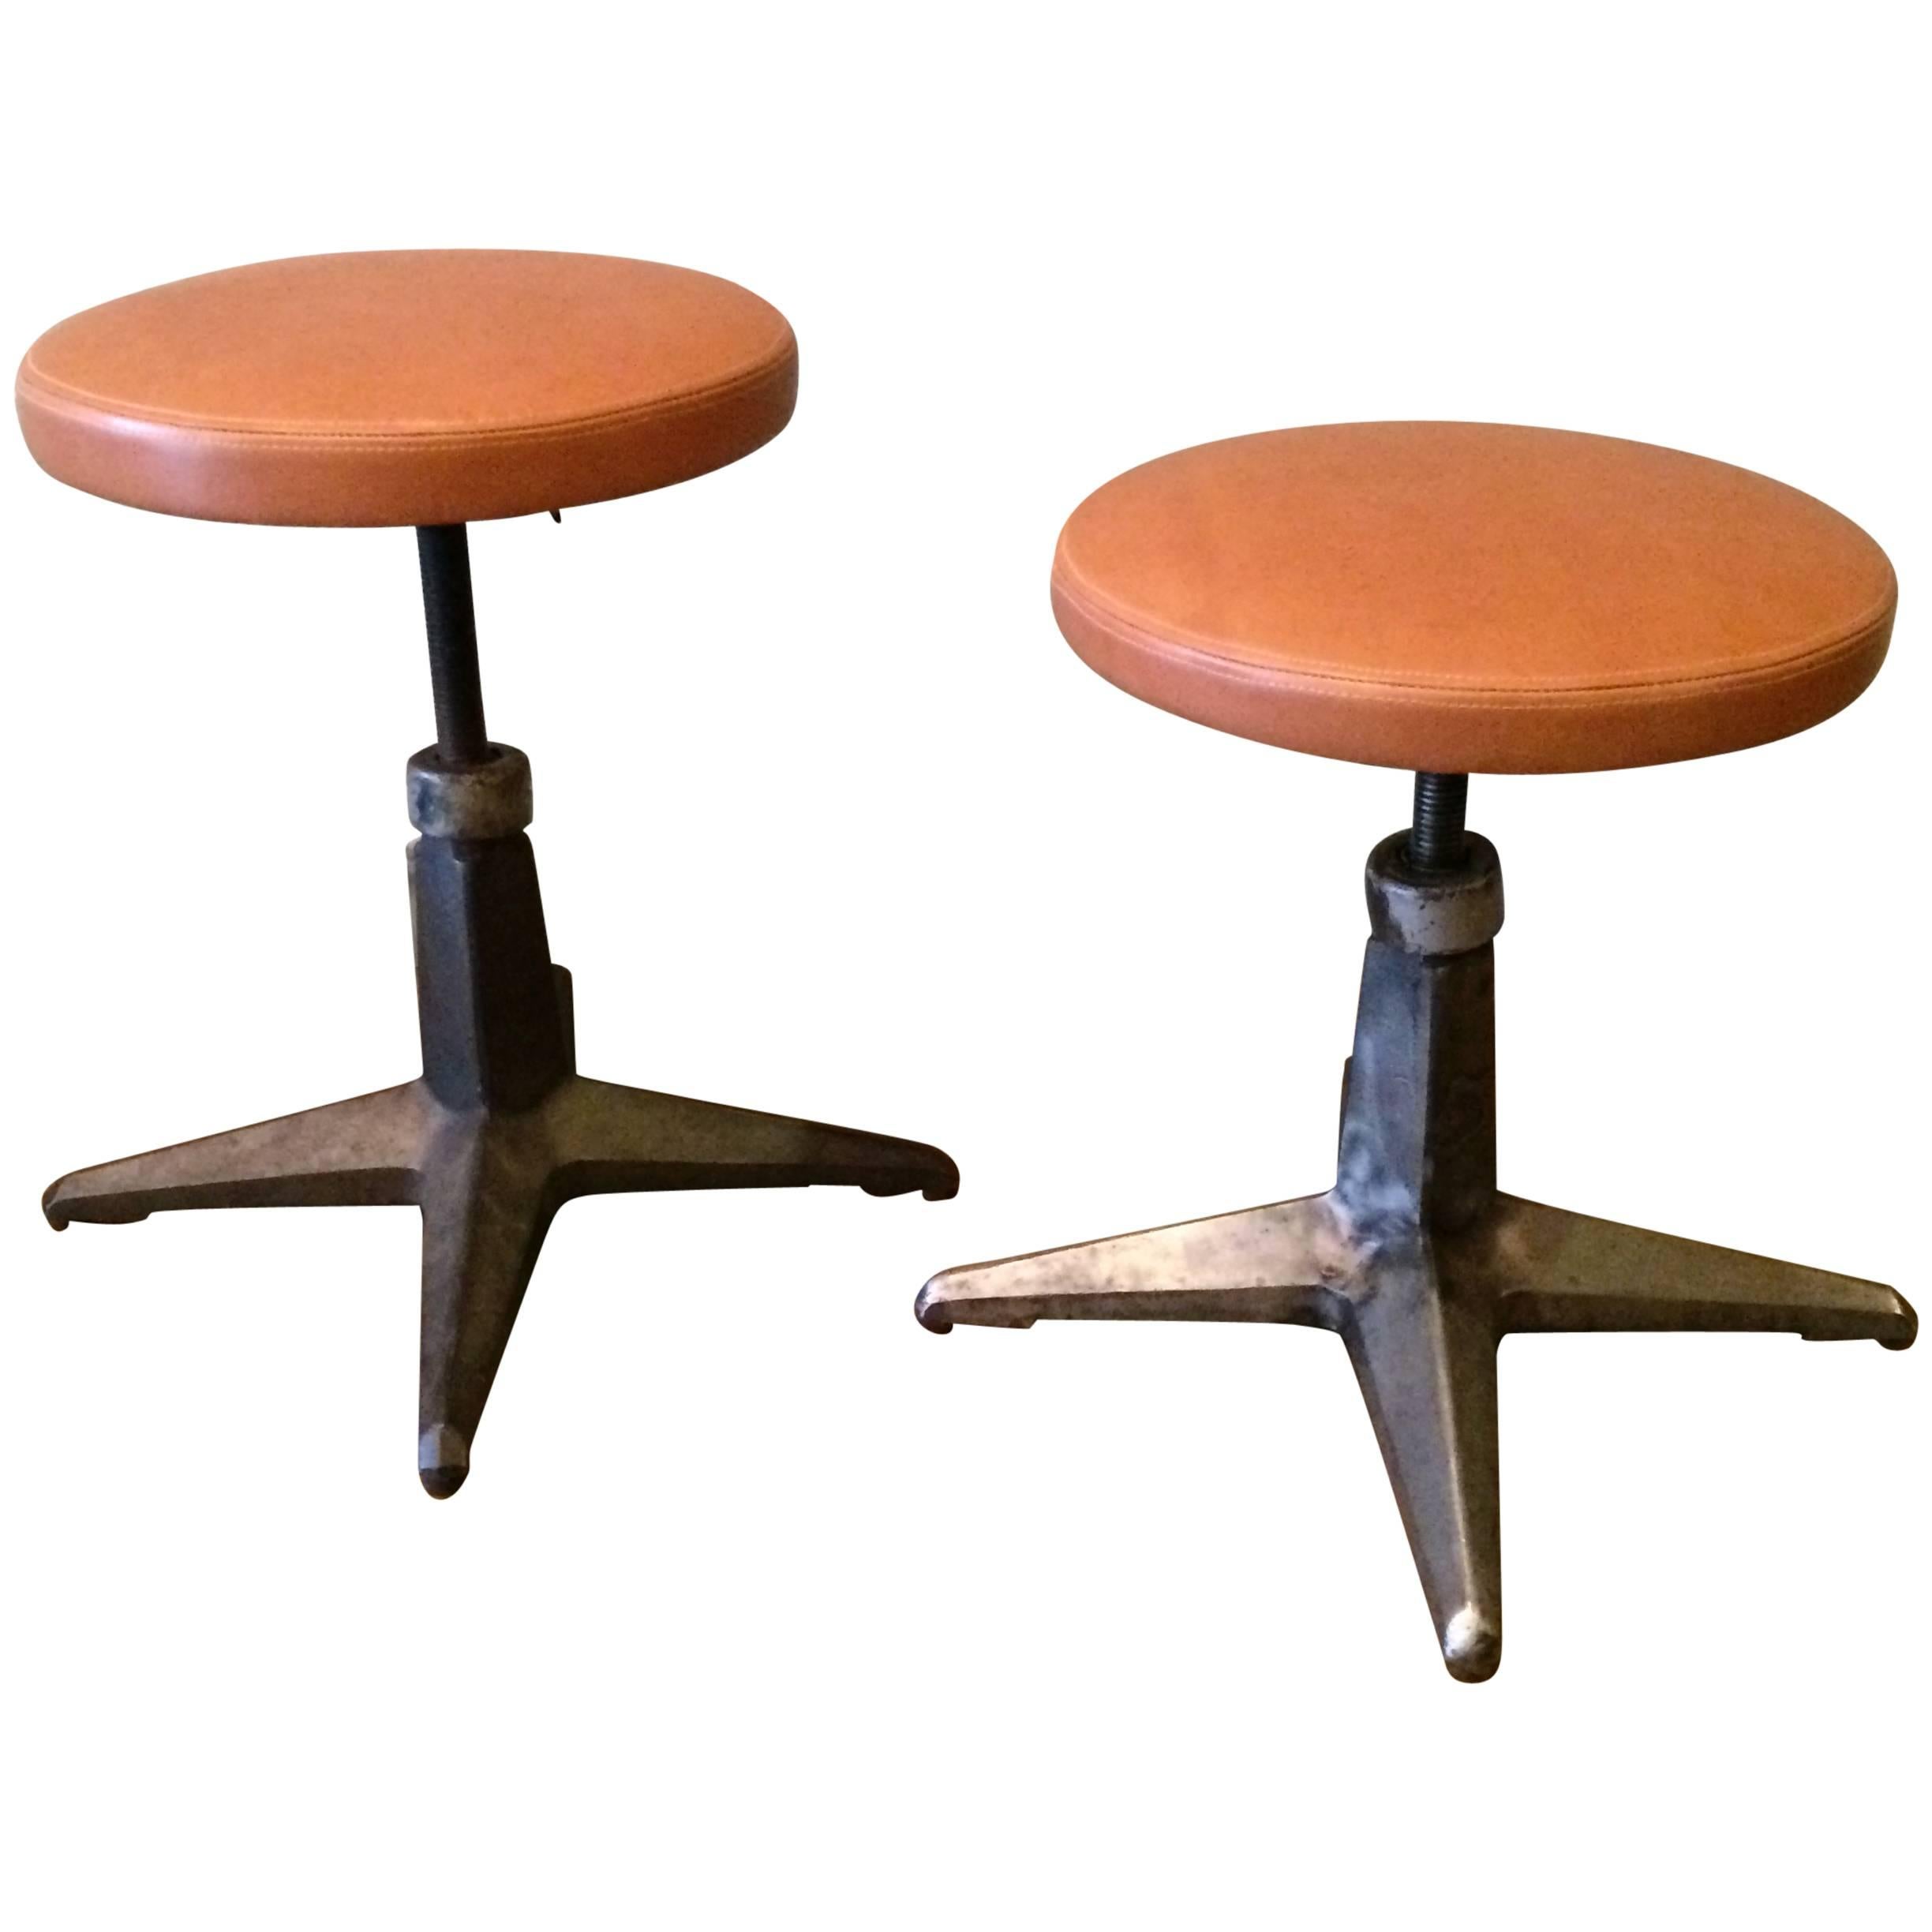 Pair Of Industrial Cast Iron Adjustable Stools with Leather Seats